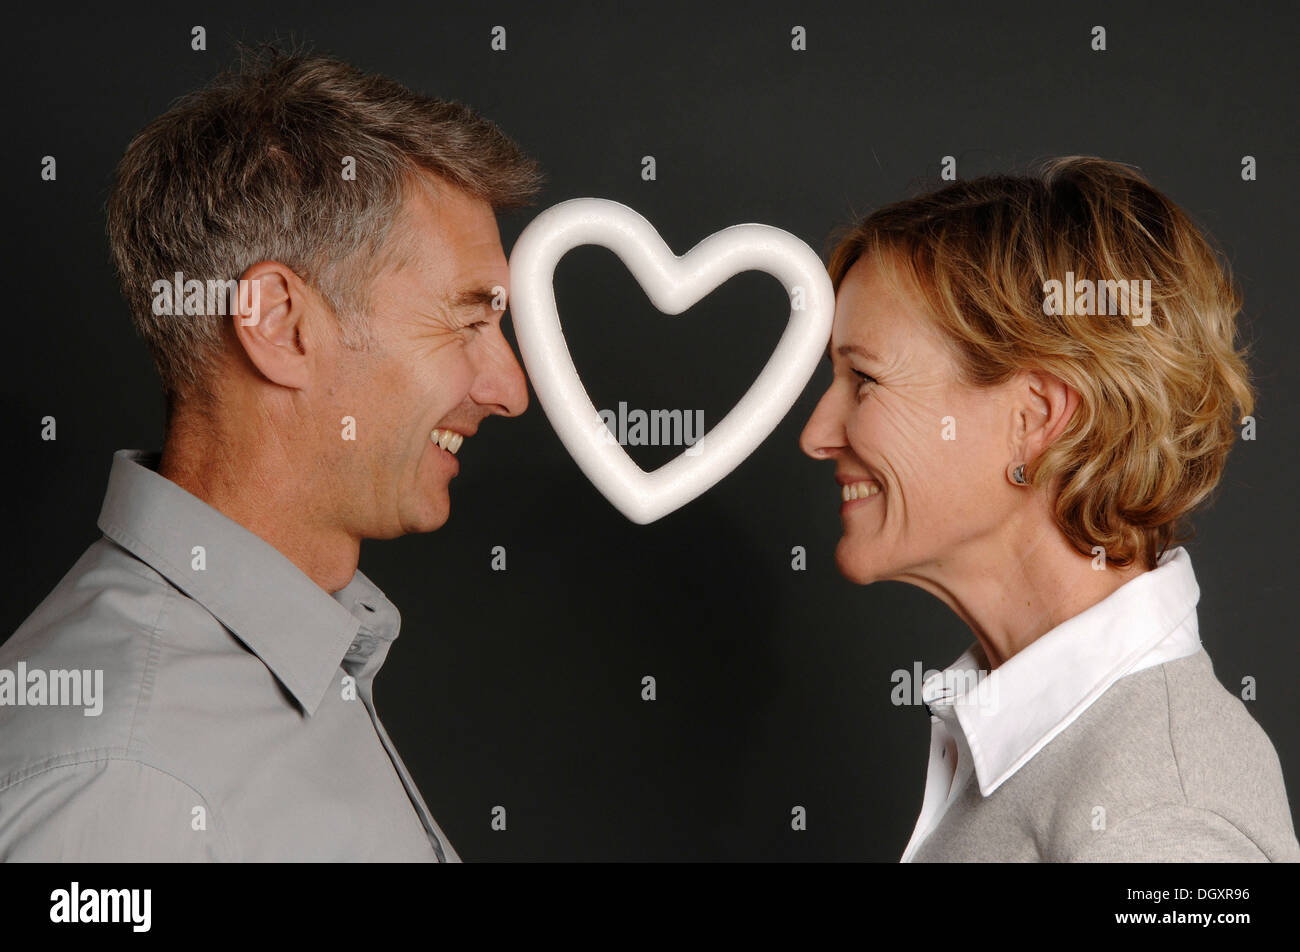 Couple, 35-45, standing face to face and holding a styrofoam heart between their foreheads Stock Photo